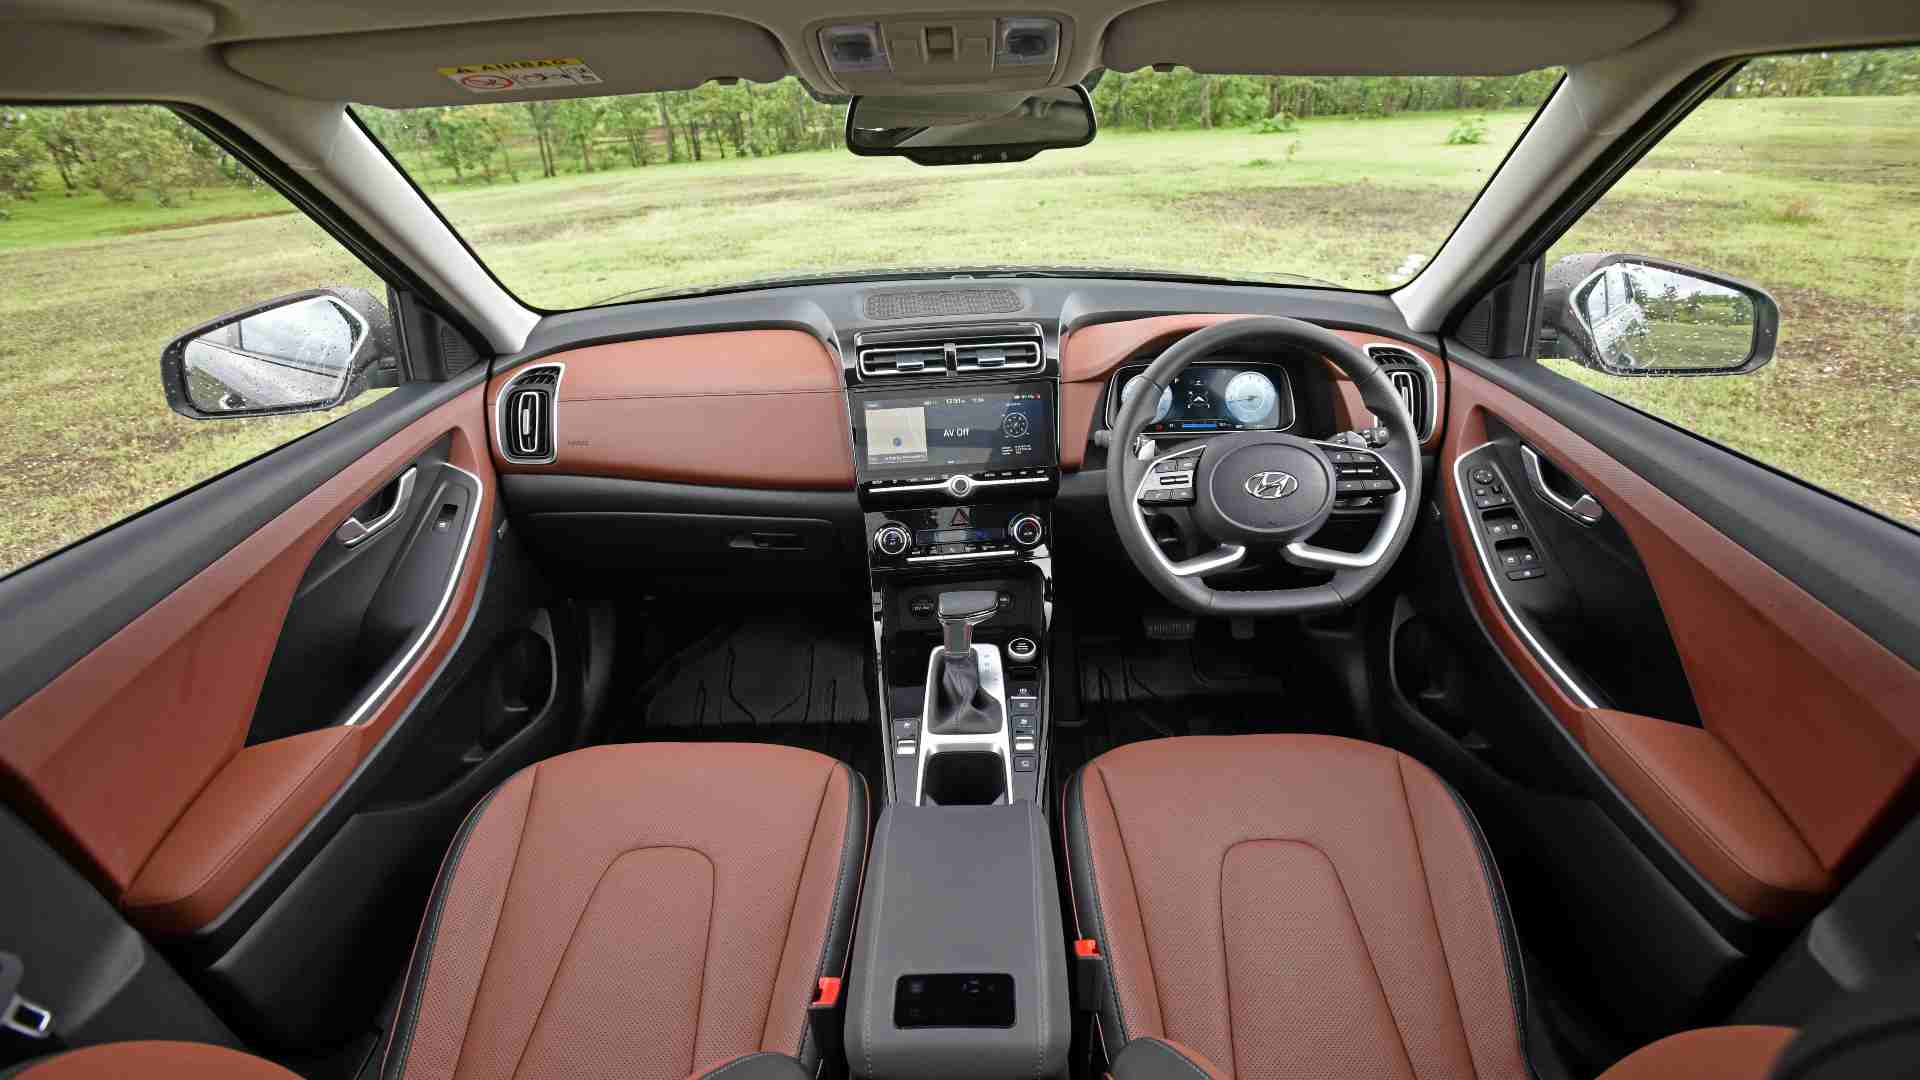 The Alcazar is pretty spacious on the inside, and is well put together. Image: Hyundai